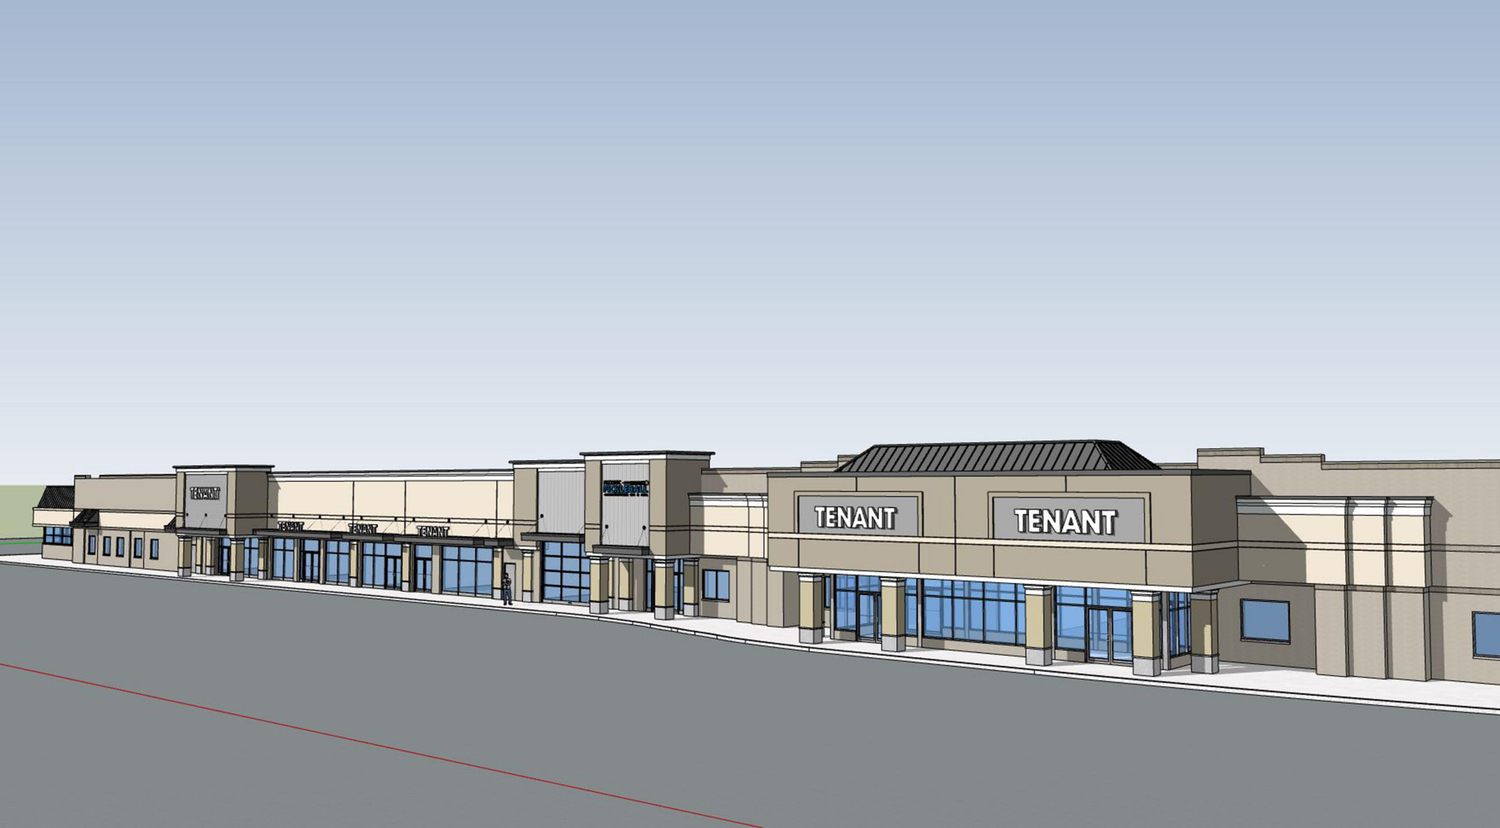 A rendering of what the renovated building that used to be K-Mart would look like.